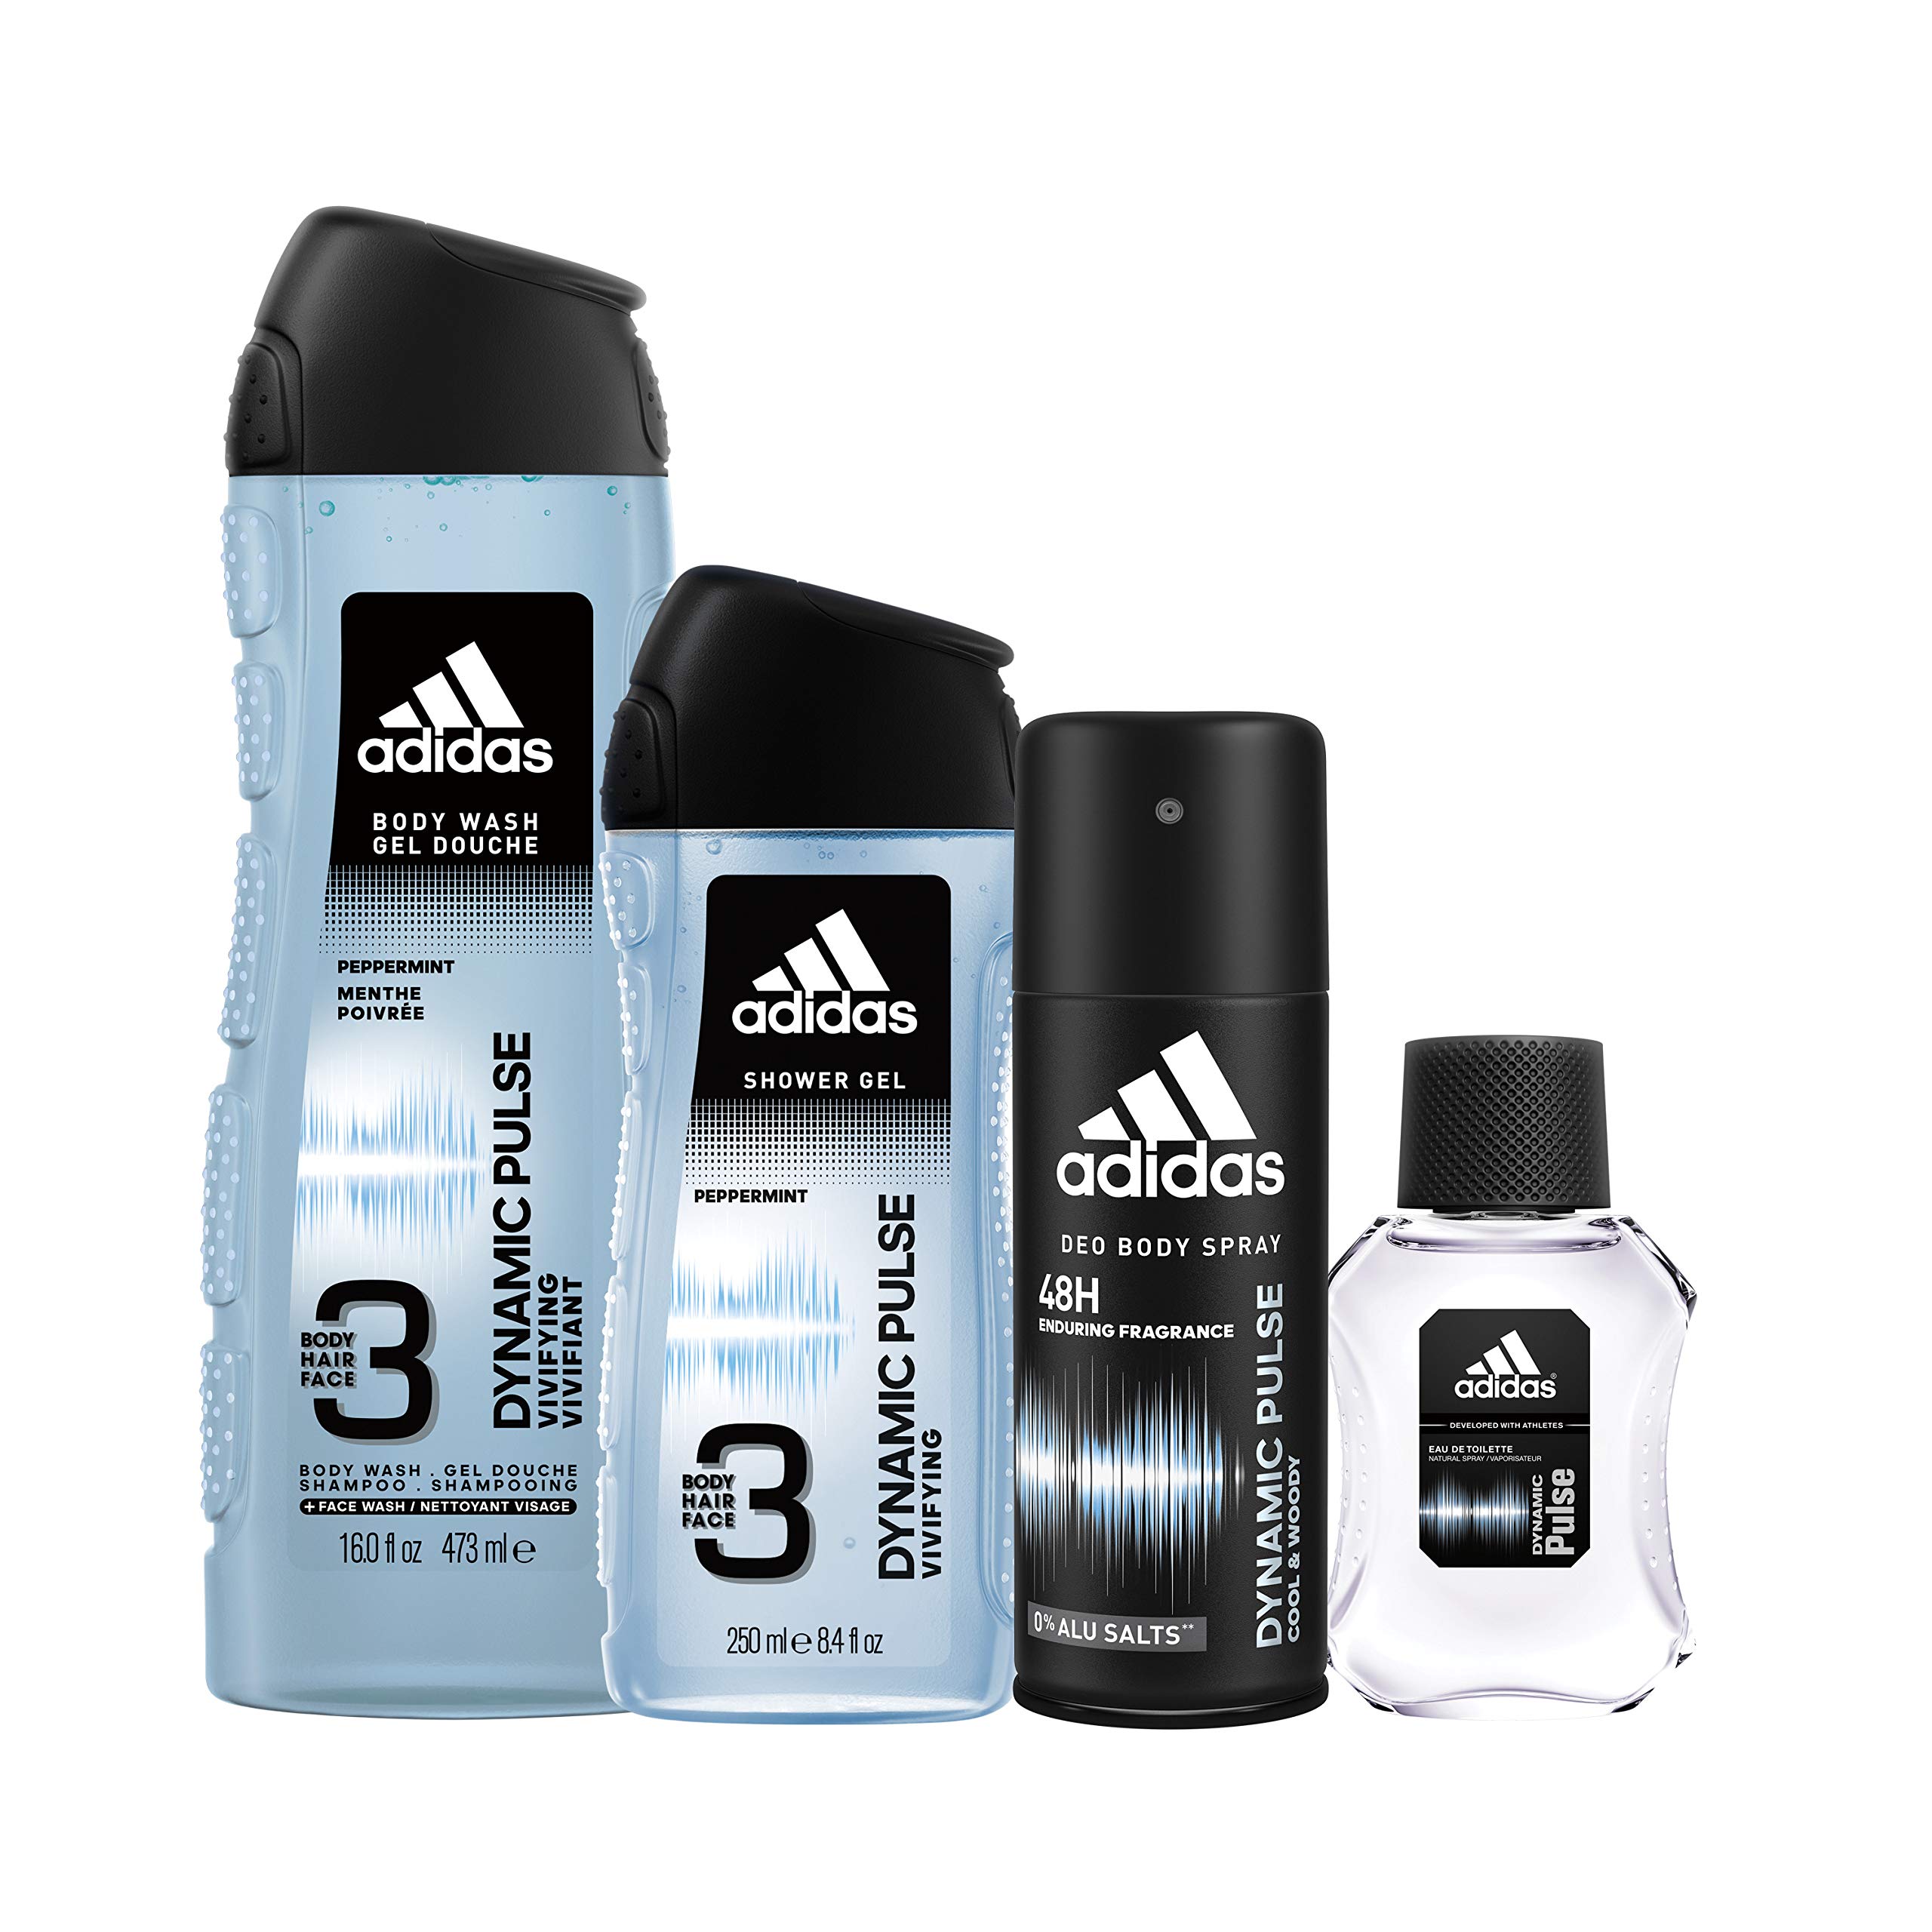 Adidas, Dynamic Pulse, Men's Home and Gym Gift Set, Total Retail Value $32.00